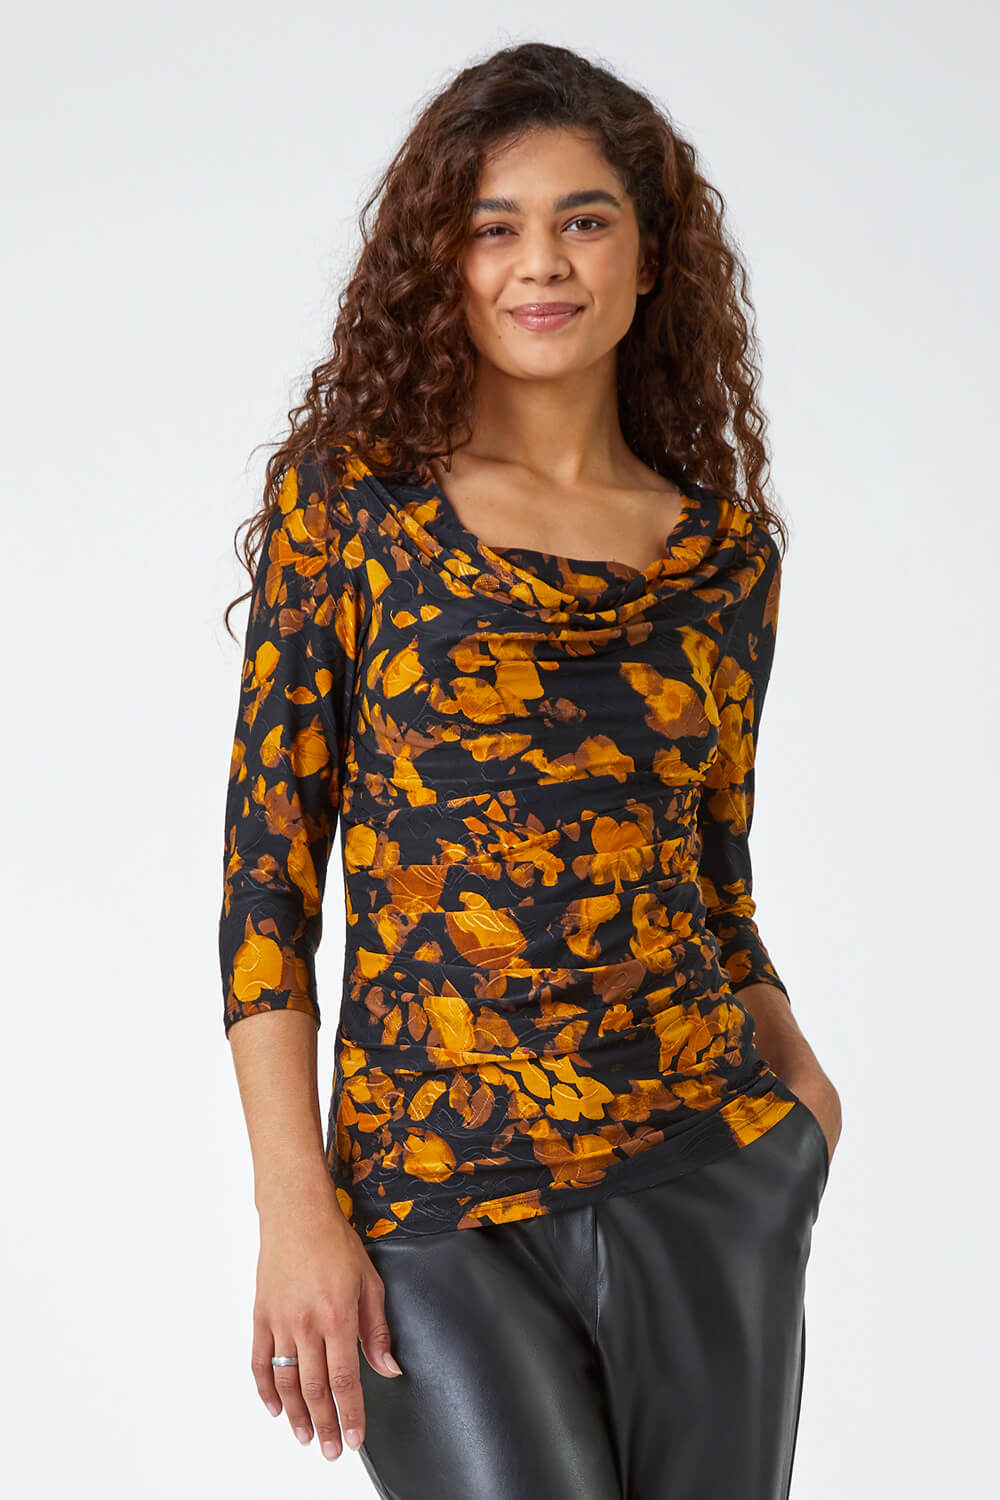 Ochre Floral Print Cowl Neck Top, Image 2 of 5